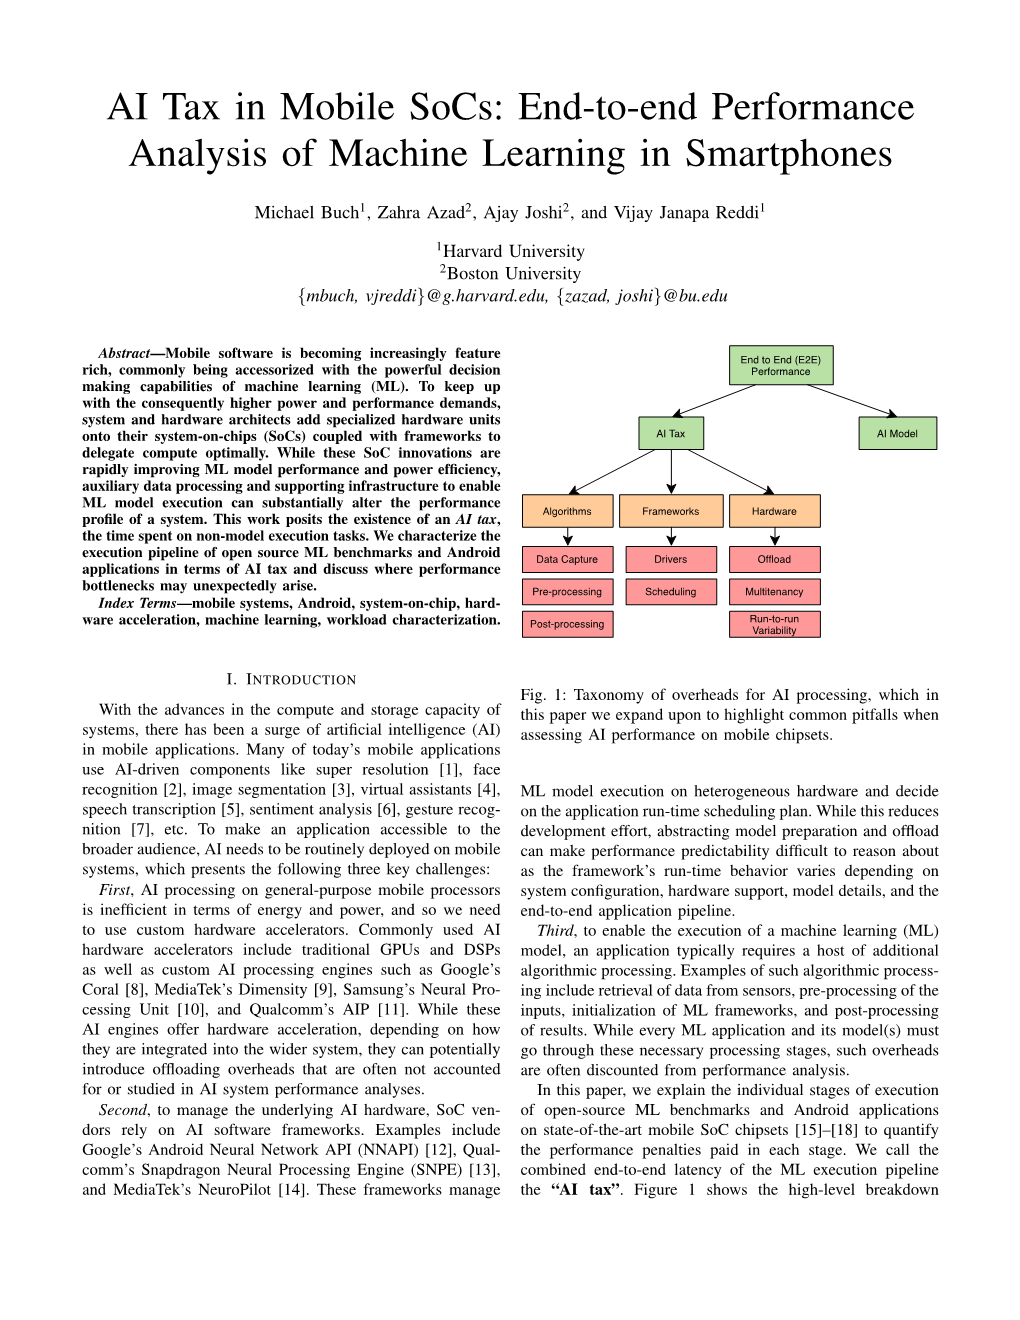 AI Tax in Mobile Socs: End-To-End Performance Analysis of Machine Learning in Smartphones